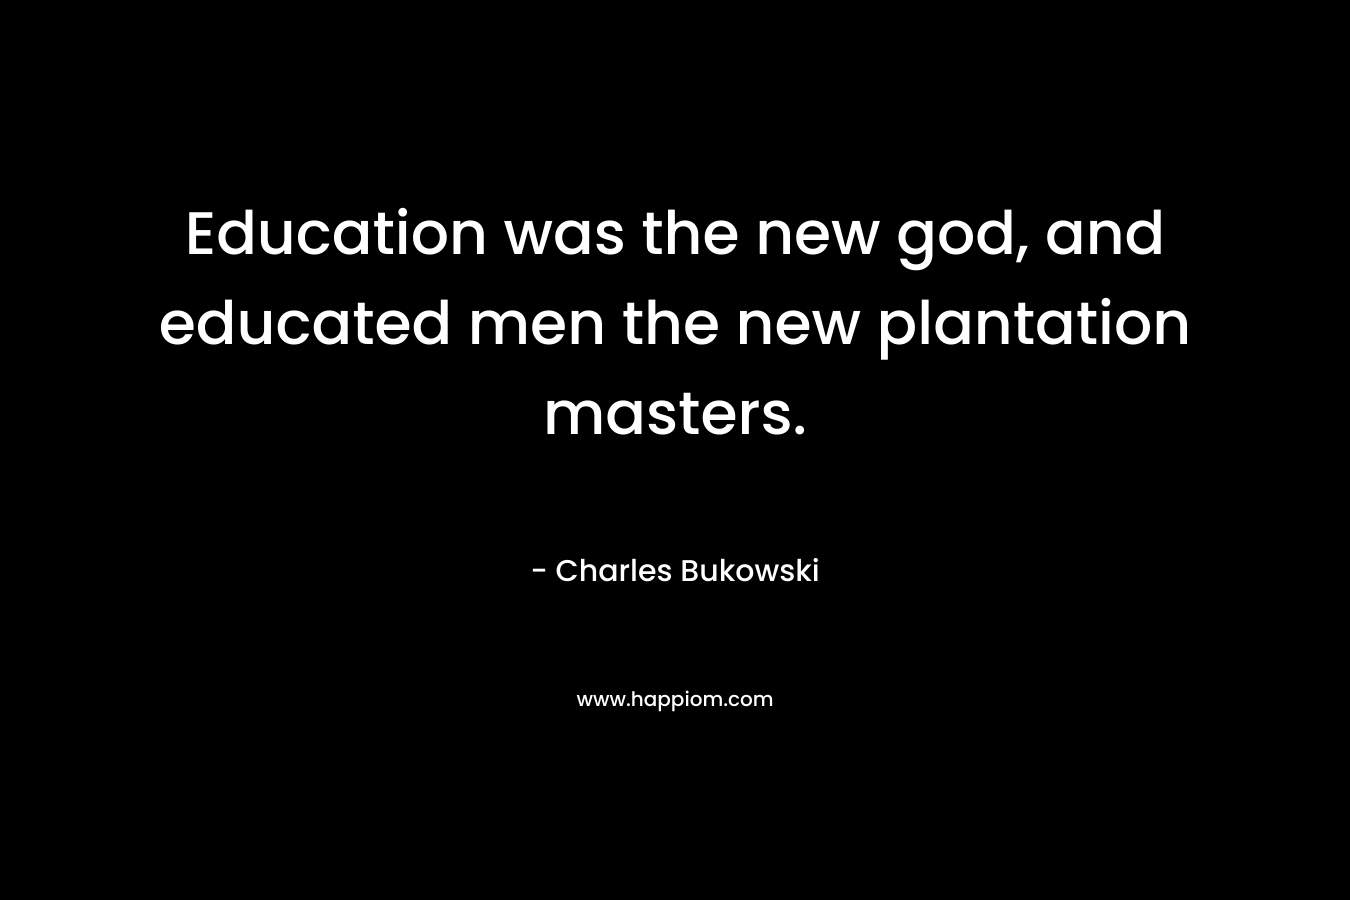 Education was the new god, and educated men the new plantation masters. – Charles Bukowski